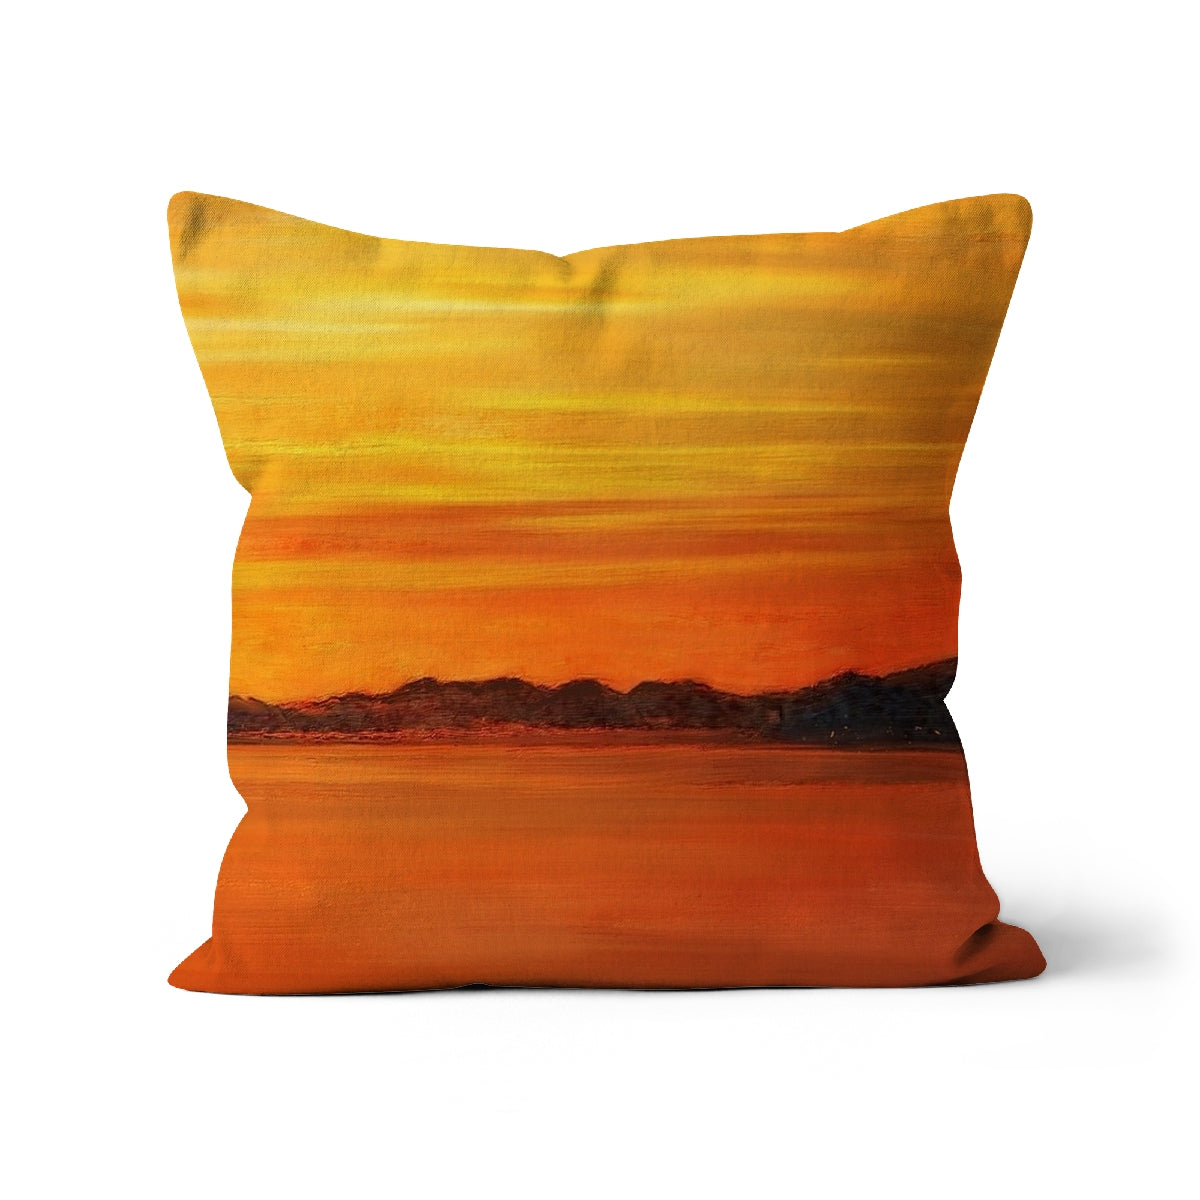 Loch Fyne Sunset Art Gifts Cushion-Cushions-Scottish Lochs & Mountains Art Gallery-Linen-12"x12"-Paintings, Prints, Homeware, Art Gifts From Scotland By Scottish Artist Kevin Hunter